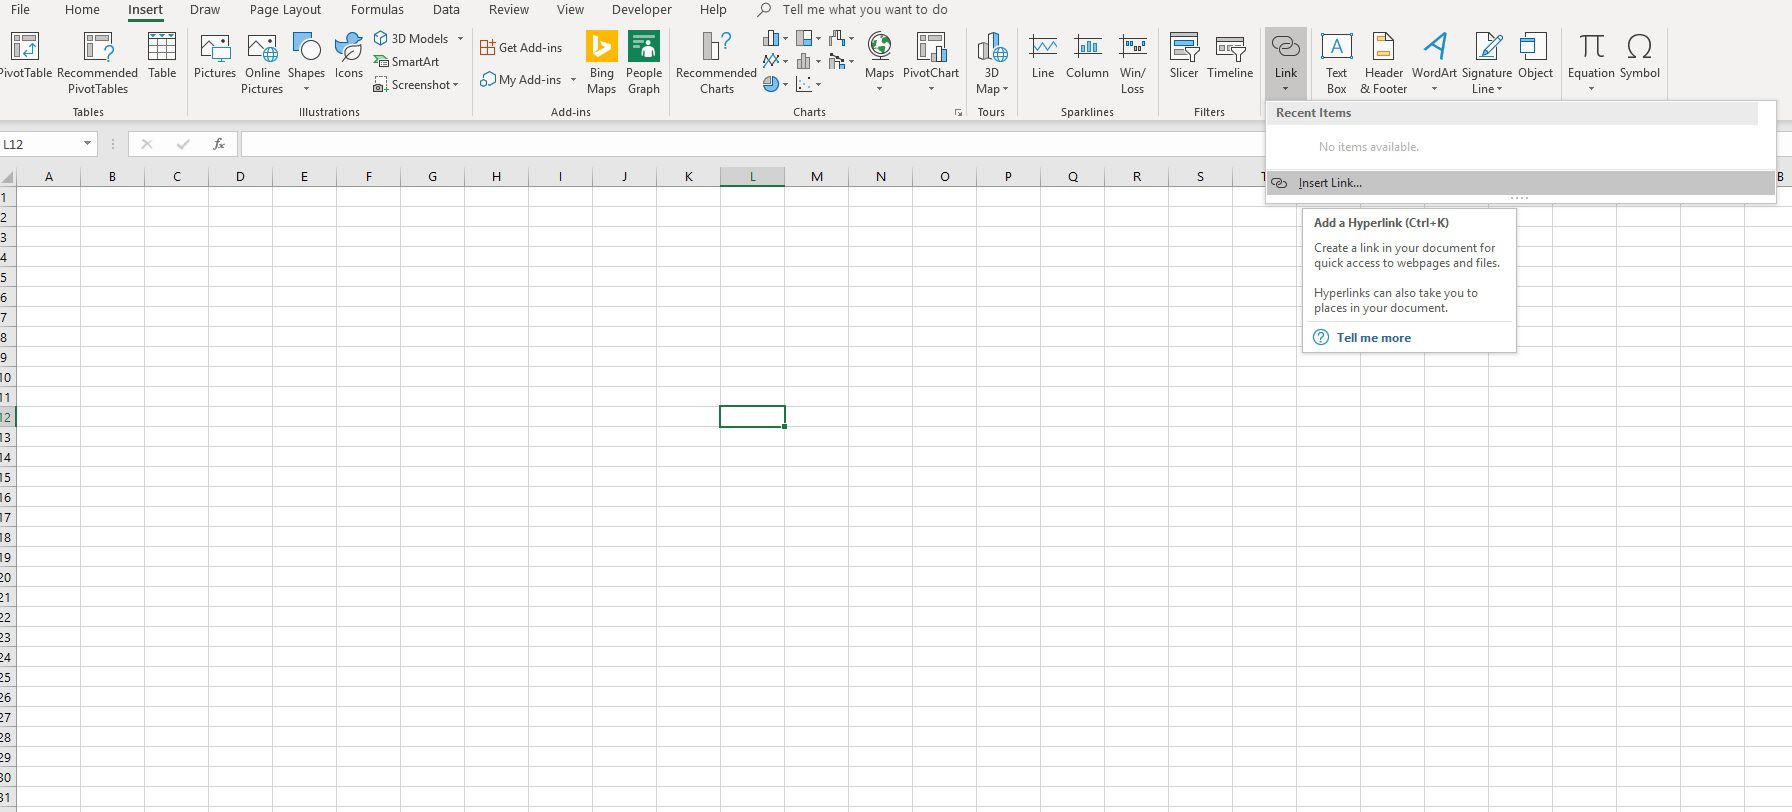 how to create hyperlink in excel 2013